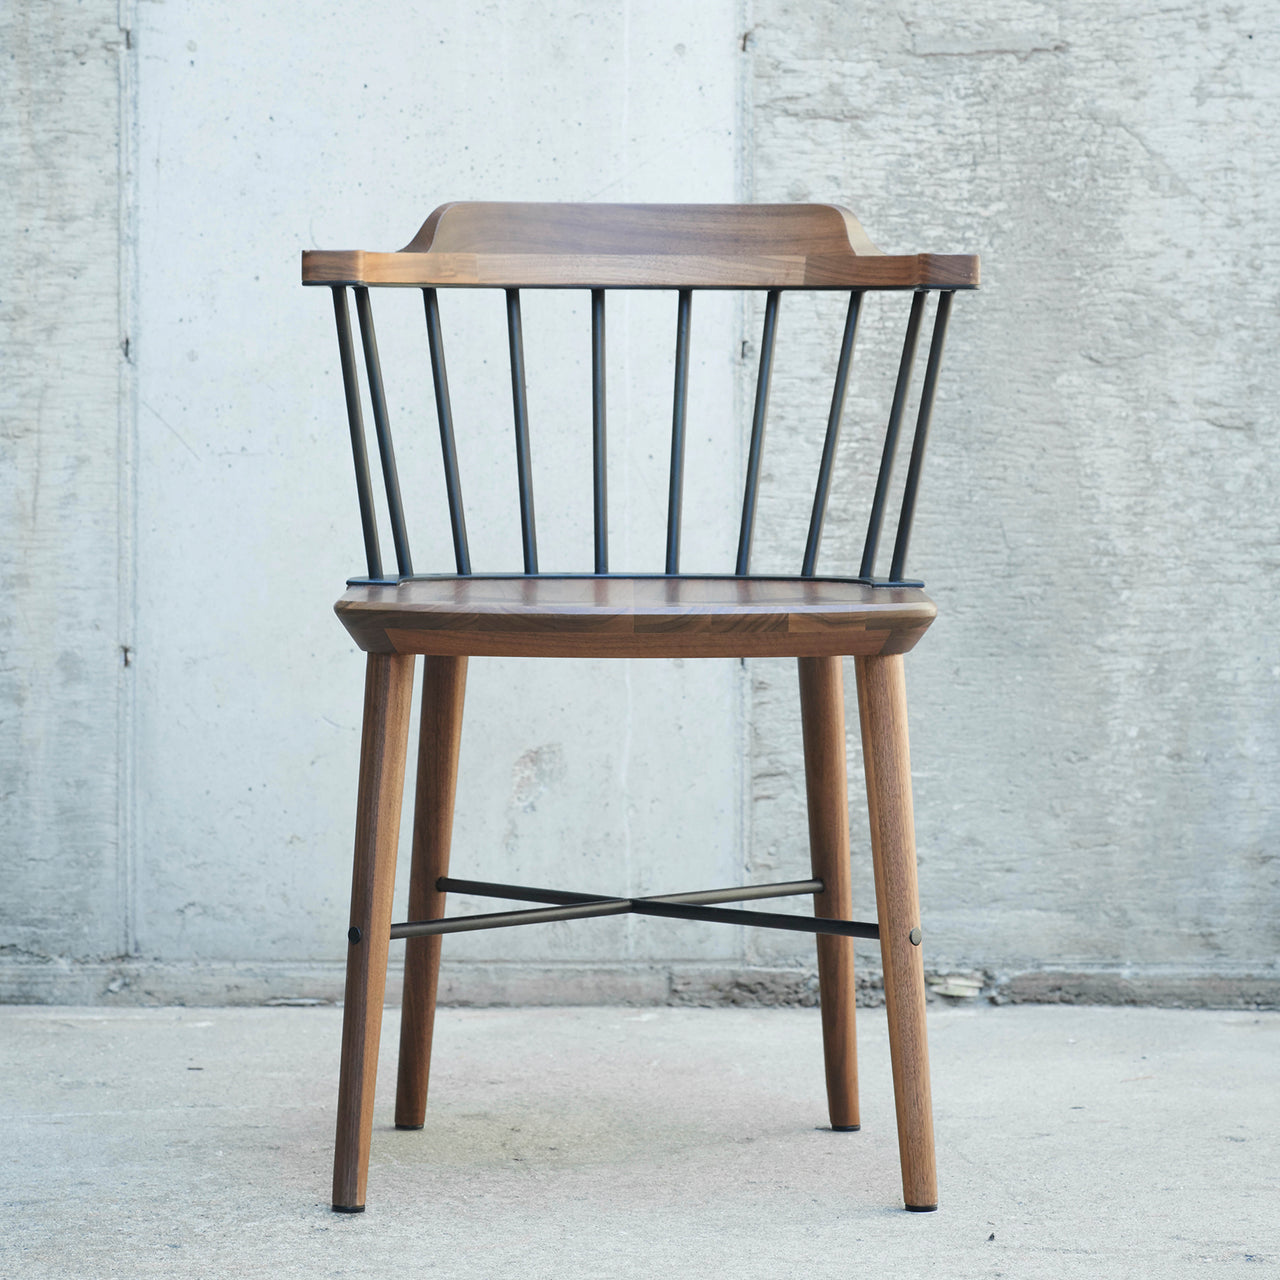 Exchange Dining Chair